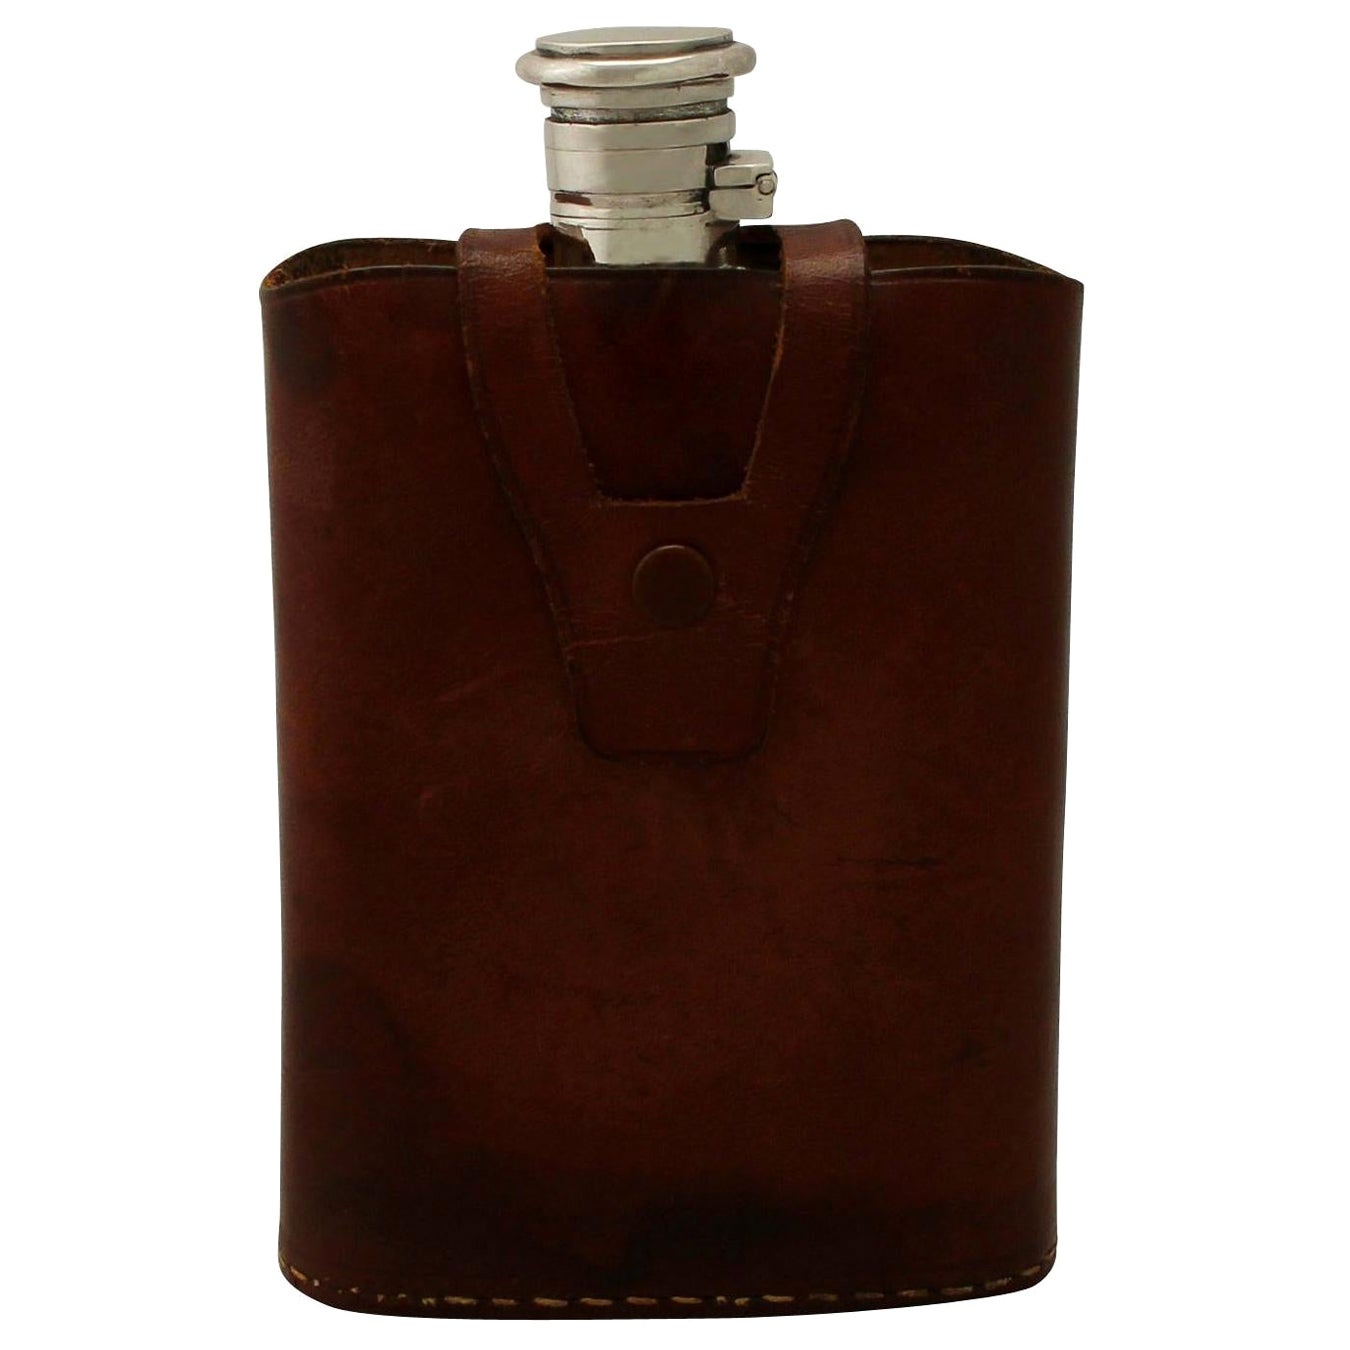 Antique Indian Silver Hip Flask with Leather Case